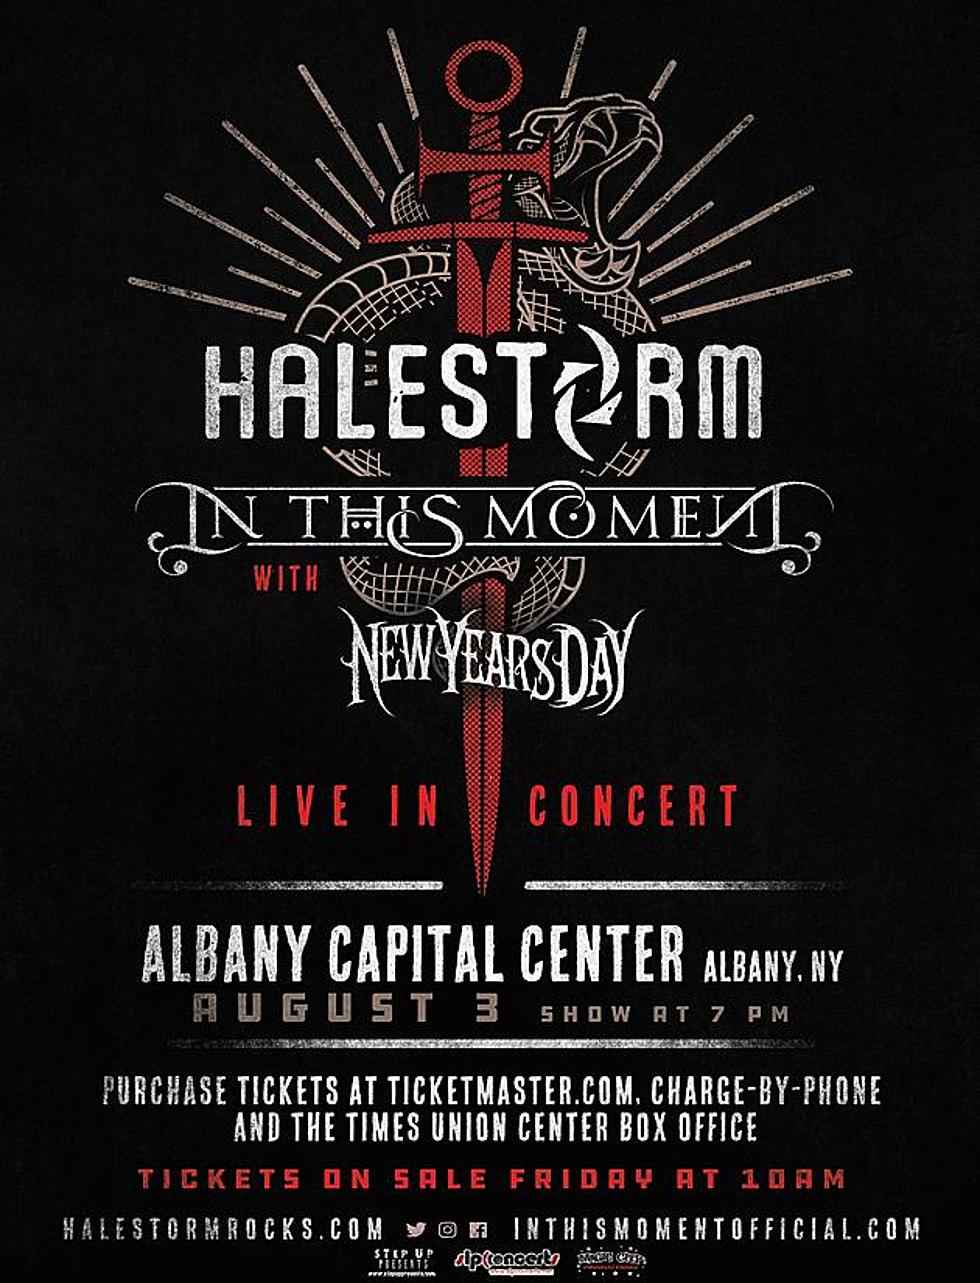 Win Halestorm/In This Moment Tickets